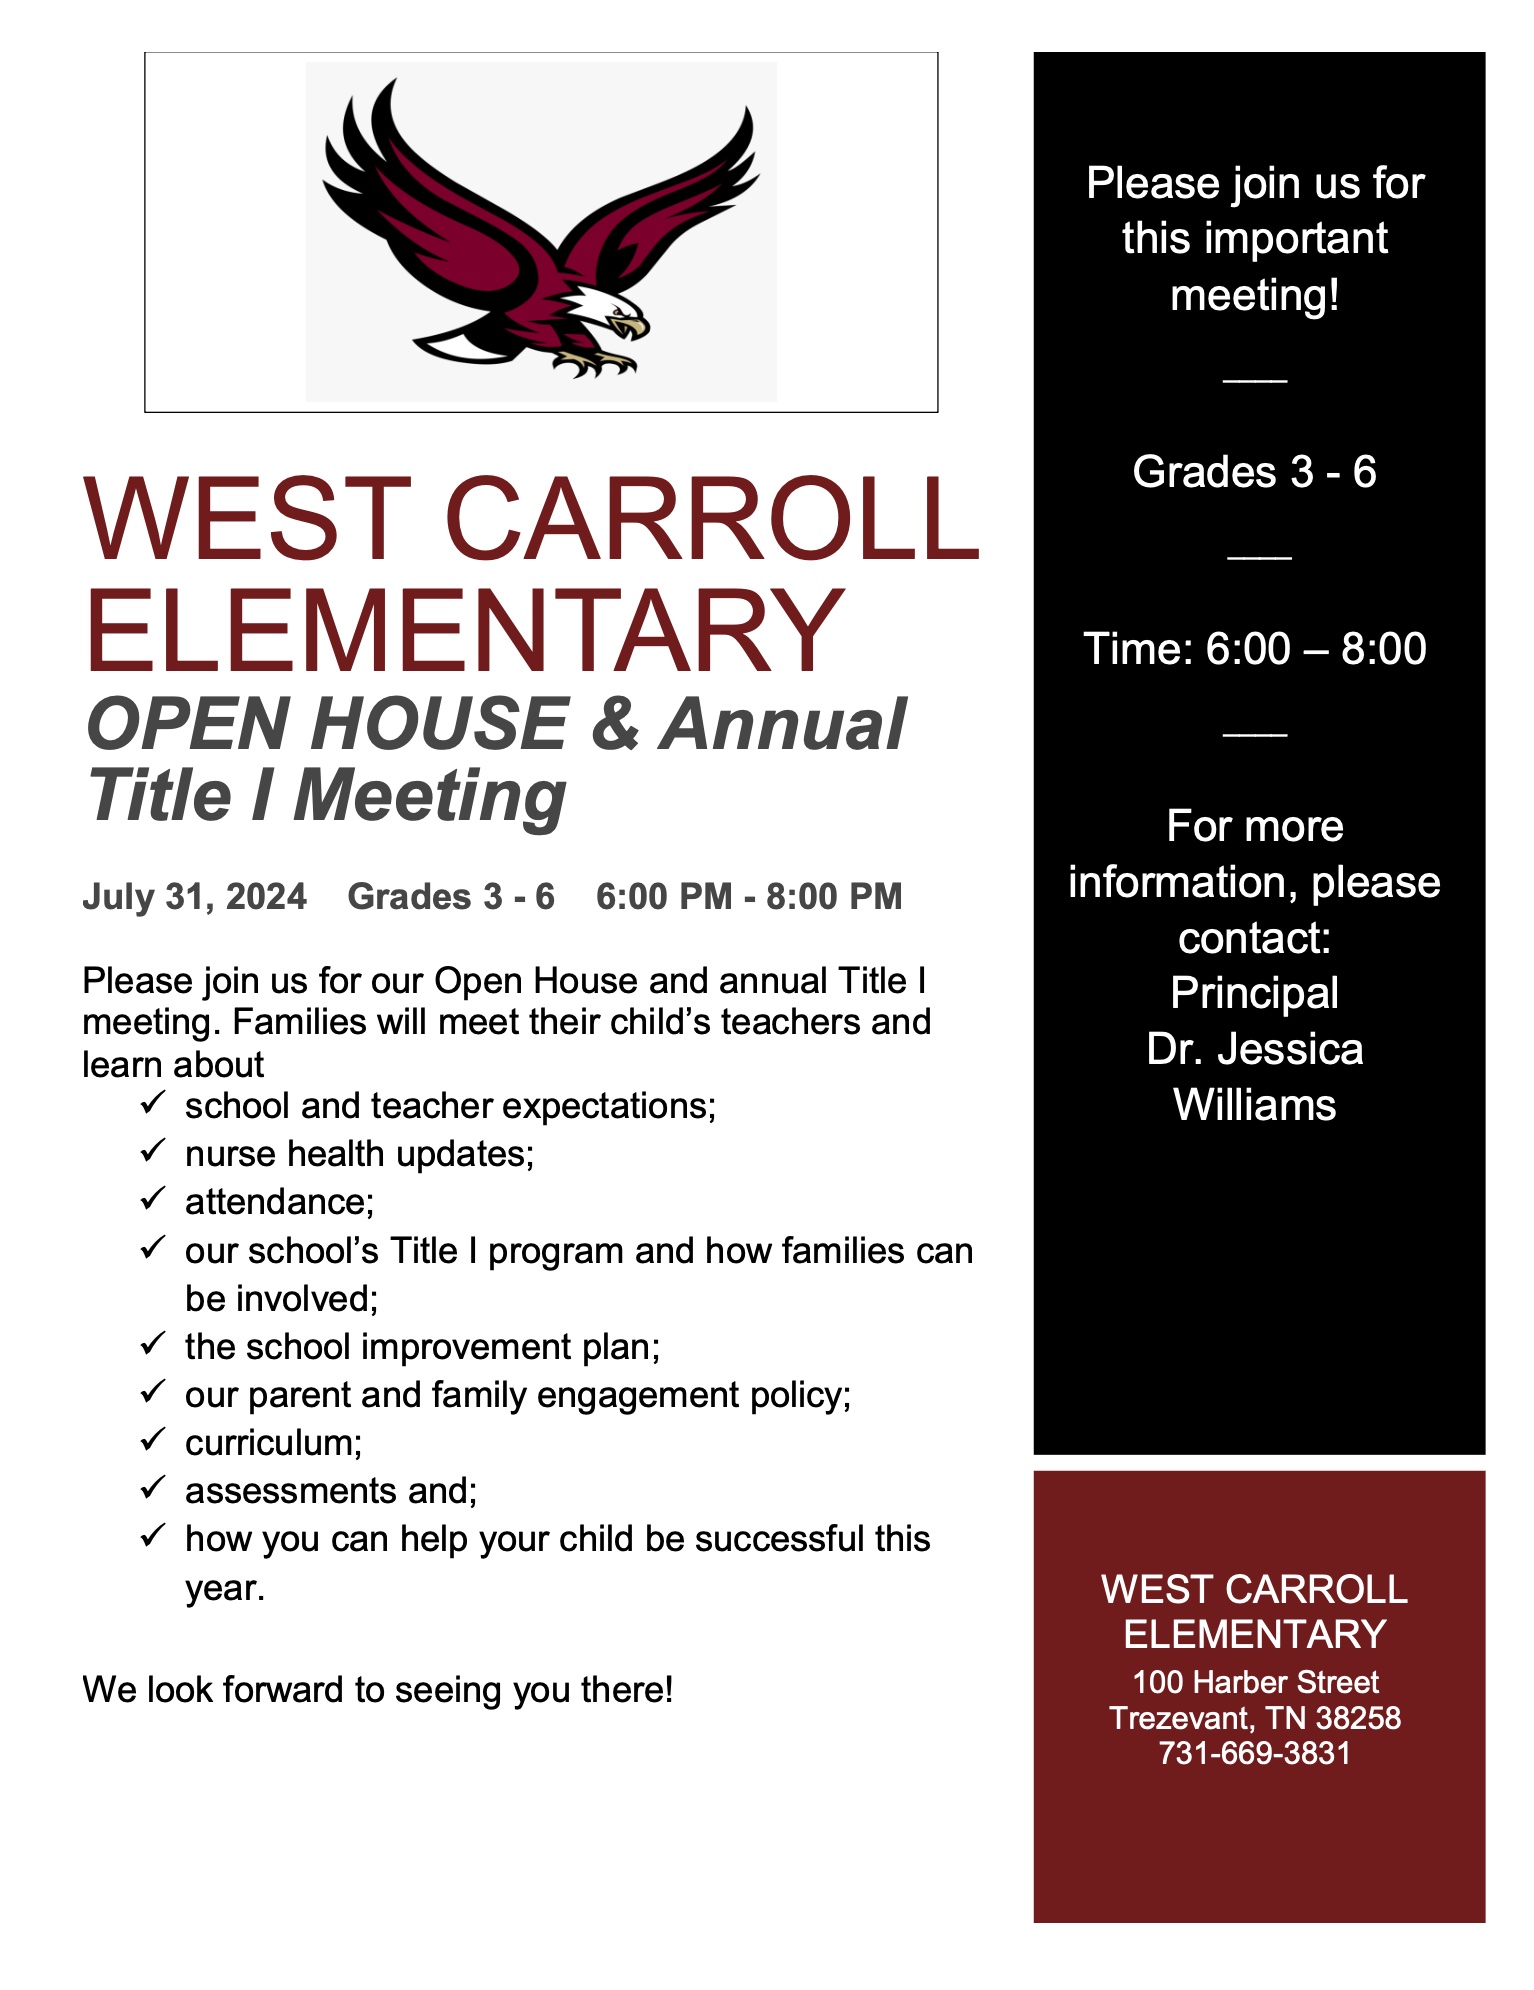 WEST CARROLL ELEMENTARY OPEN HOUSE & Annual Title I Meeting July 31, 2024 Grades 3 - 6 6:00 PM - 8:00 PM Please join us for our Open House and annual Title I meeting. 